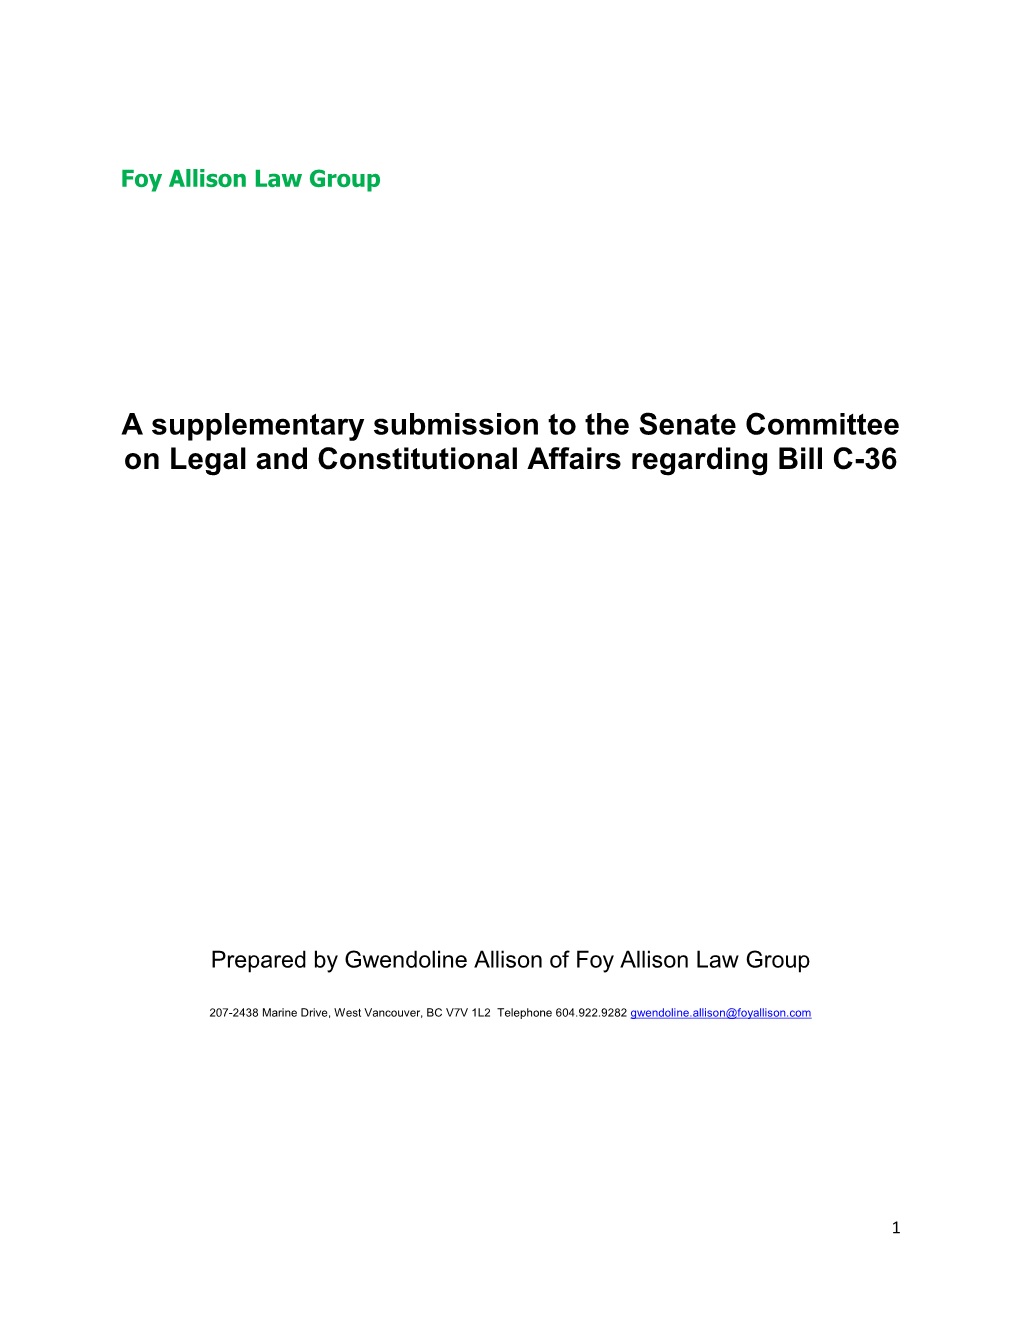 A Supplementary Submission to the Senate Committee on Legal and Constitutional Affairs Regarding Bill C-36